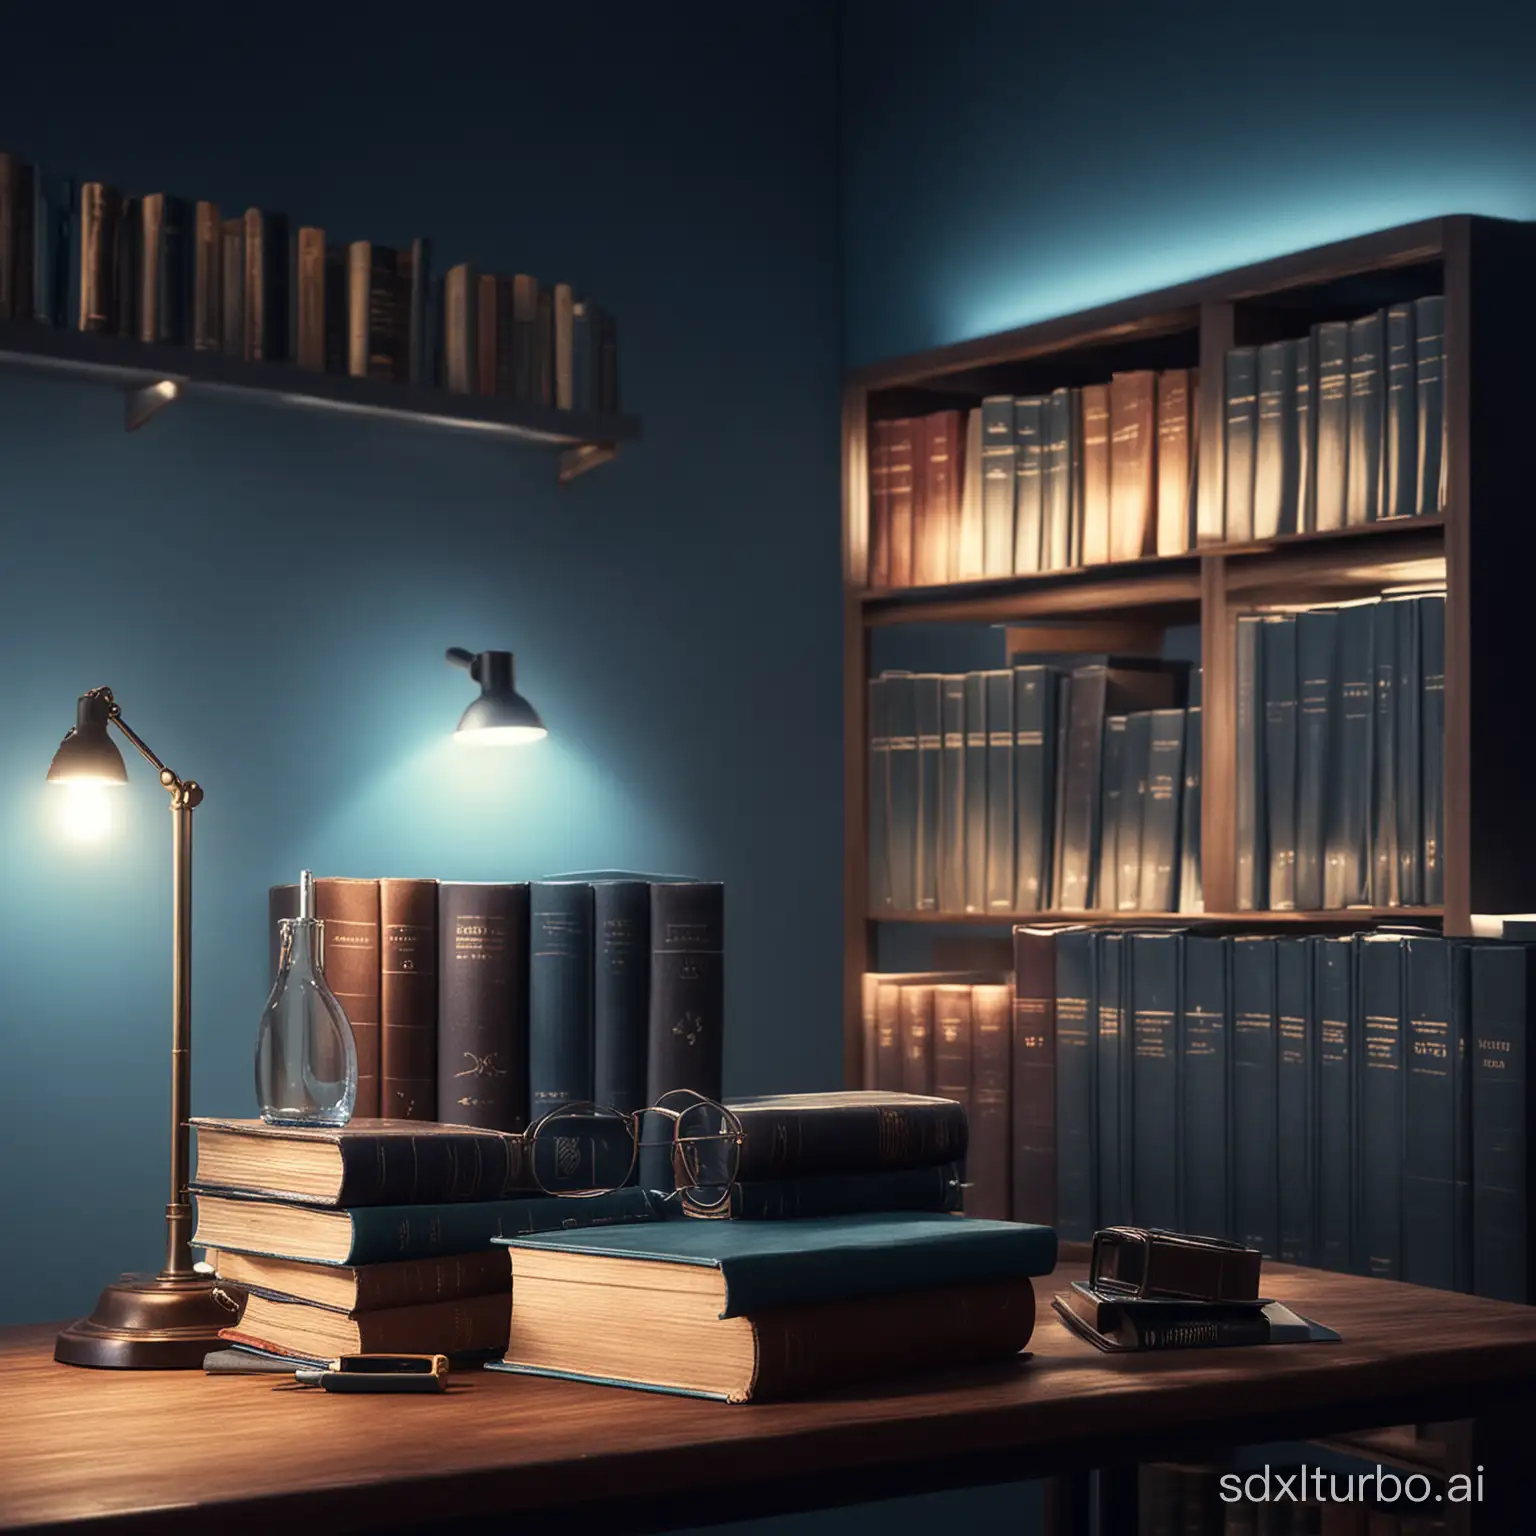 Creat office background with books and beautiful blue lighting